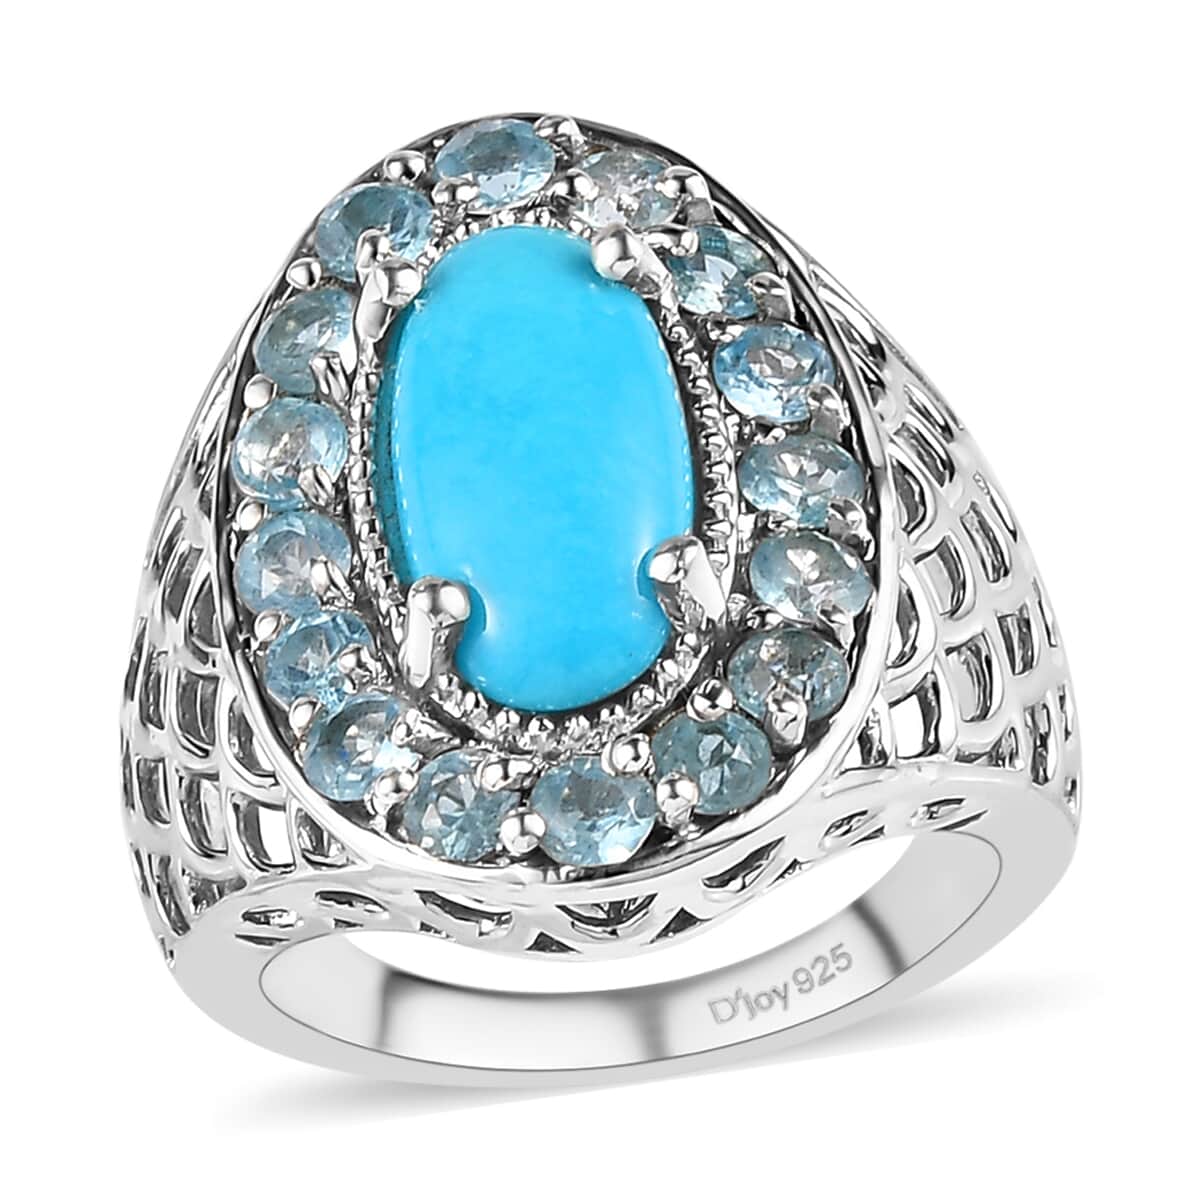 Aura - Birthstone Ring with A Sky Blue Topaz Center Stone with Diamond Halo & Accents - Ready to Ship